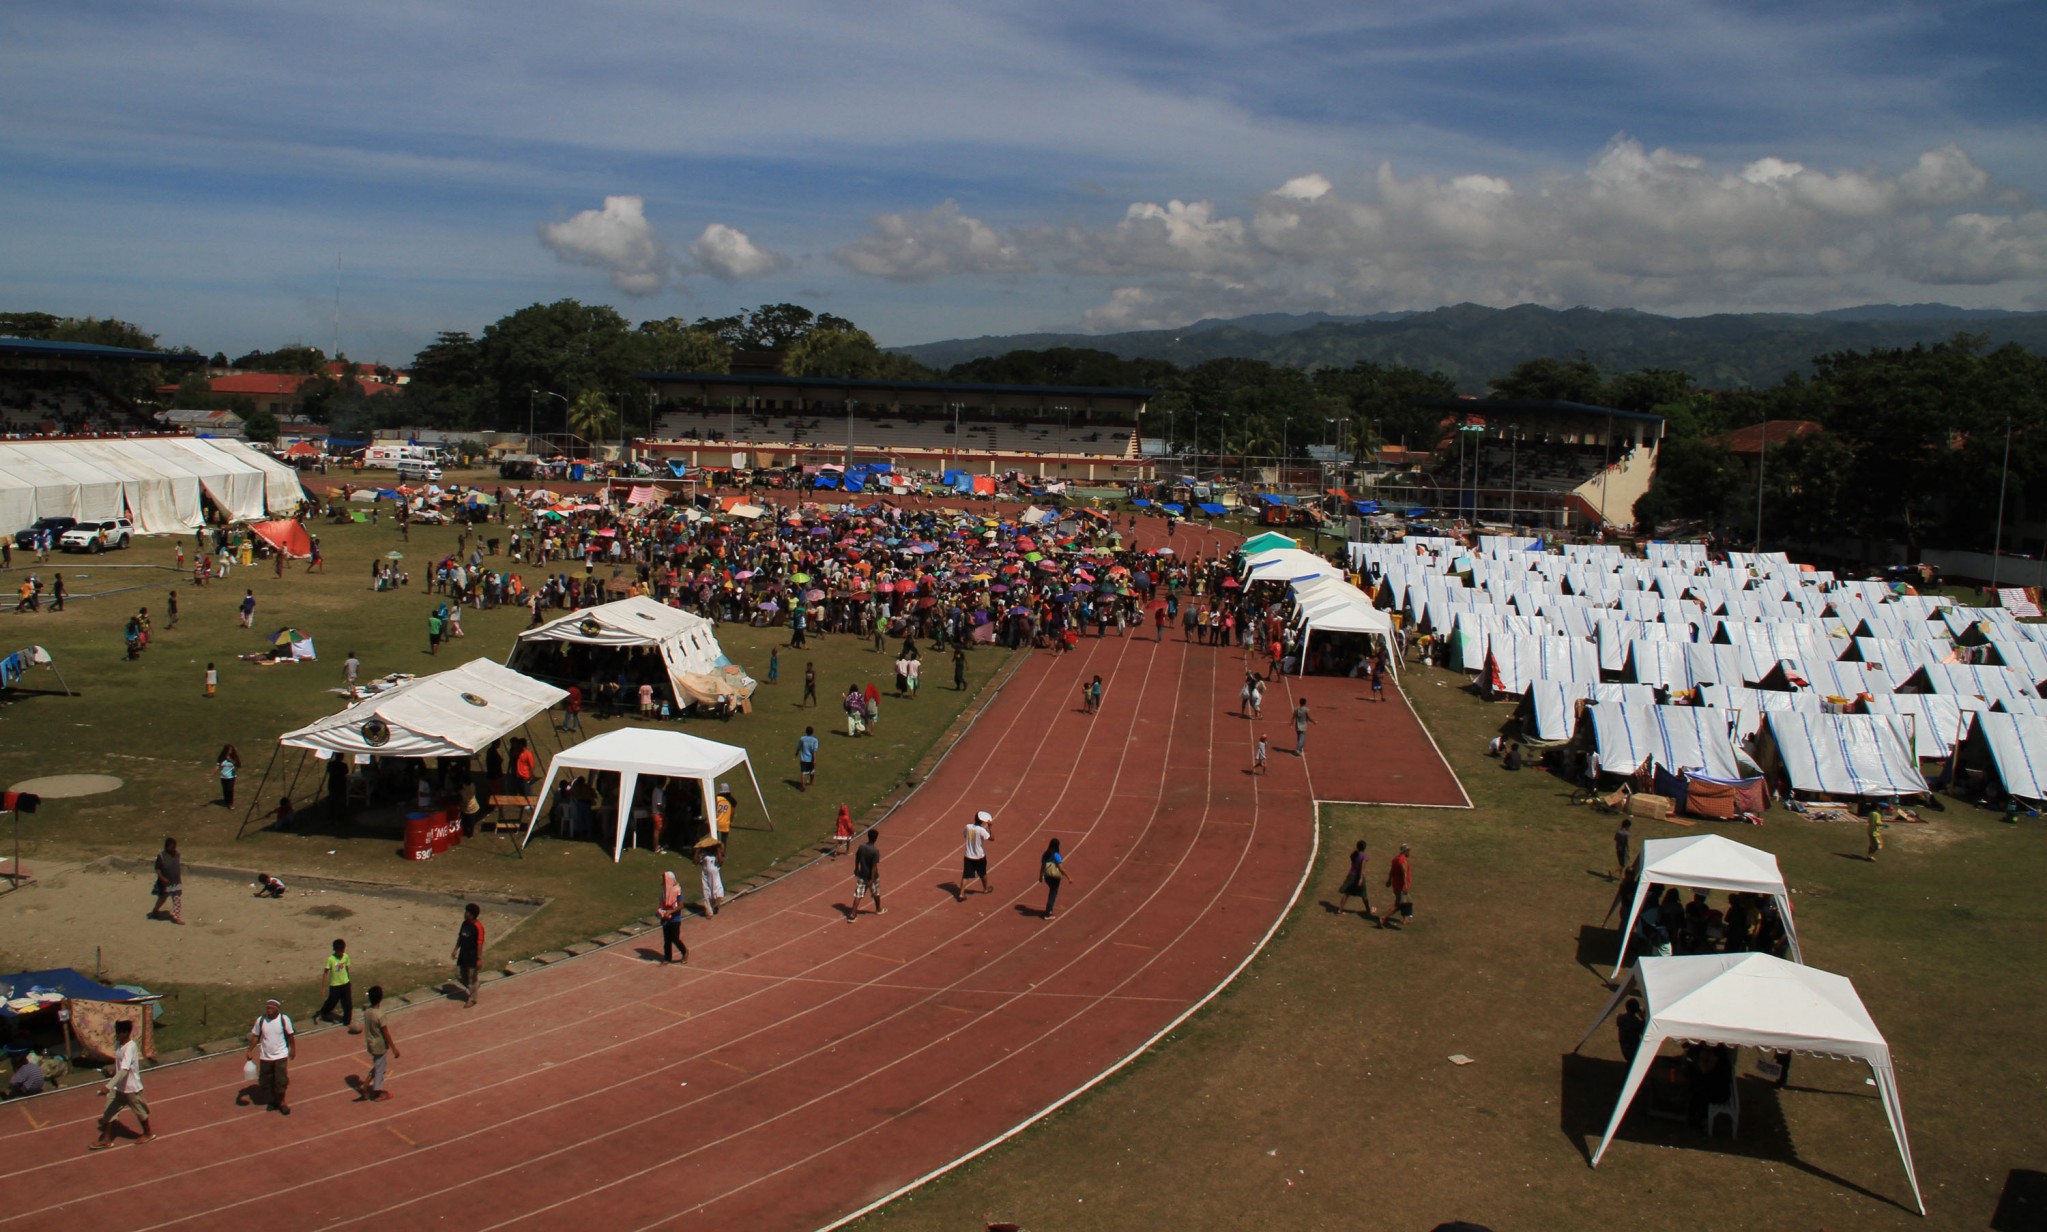 At least 40,000 individuals seek refuge inside the Zamboanga City sports center as the standoff enters Day Six on Saturday, September 14, 2013. The evacuees come from nine barangays affected by clashes between government security forces and Moro National Liberation Front members loyal to Nur Misuari, the group's founding chair, since Monday. No ceasefire has been declared. MindaNews contributed photo